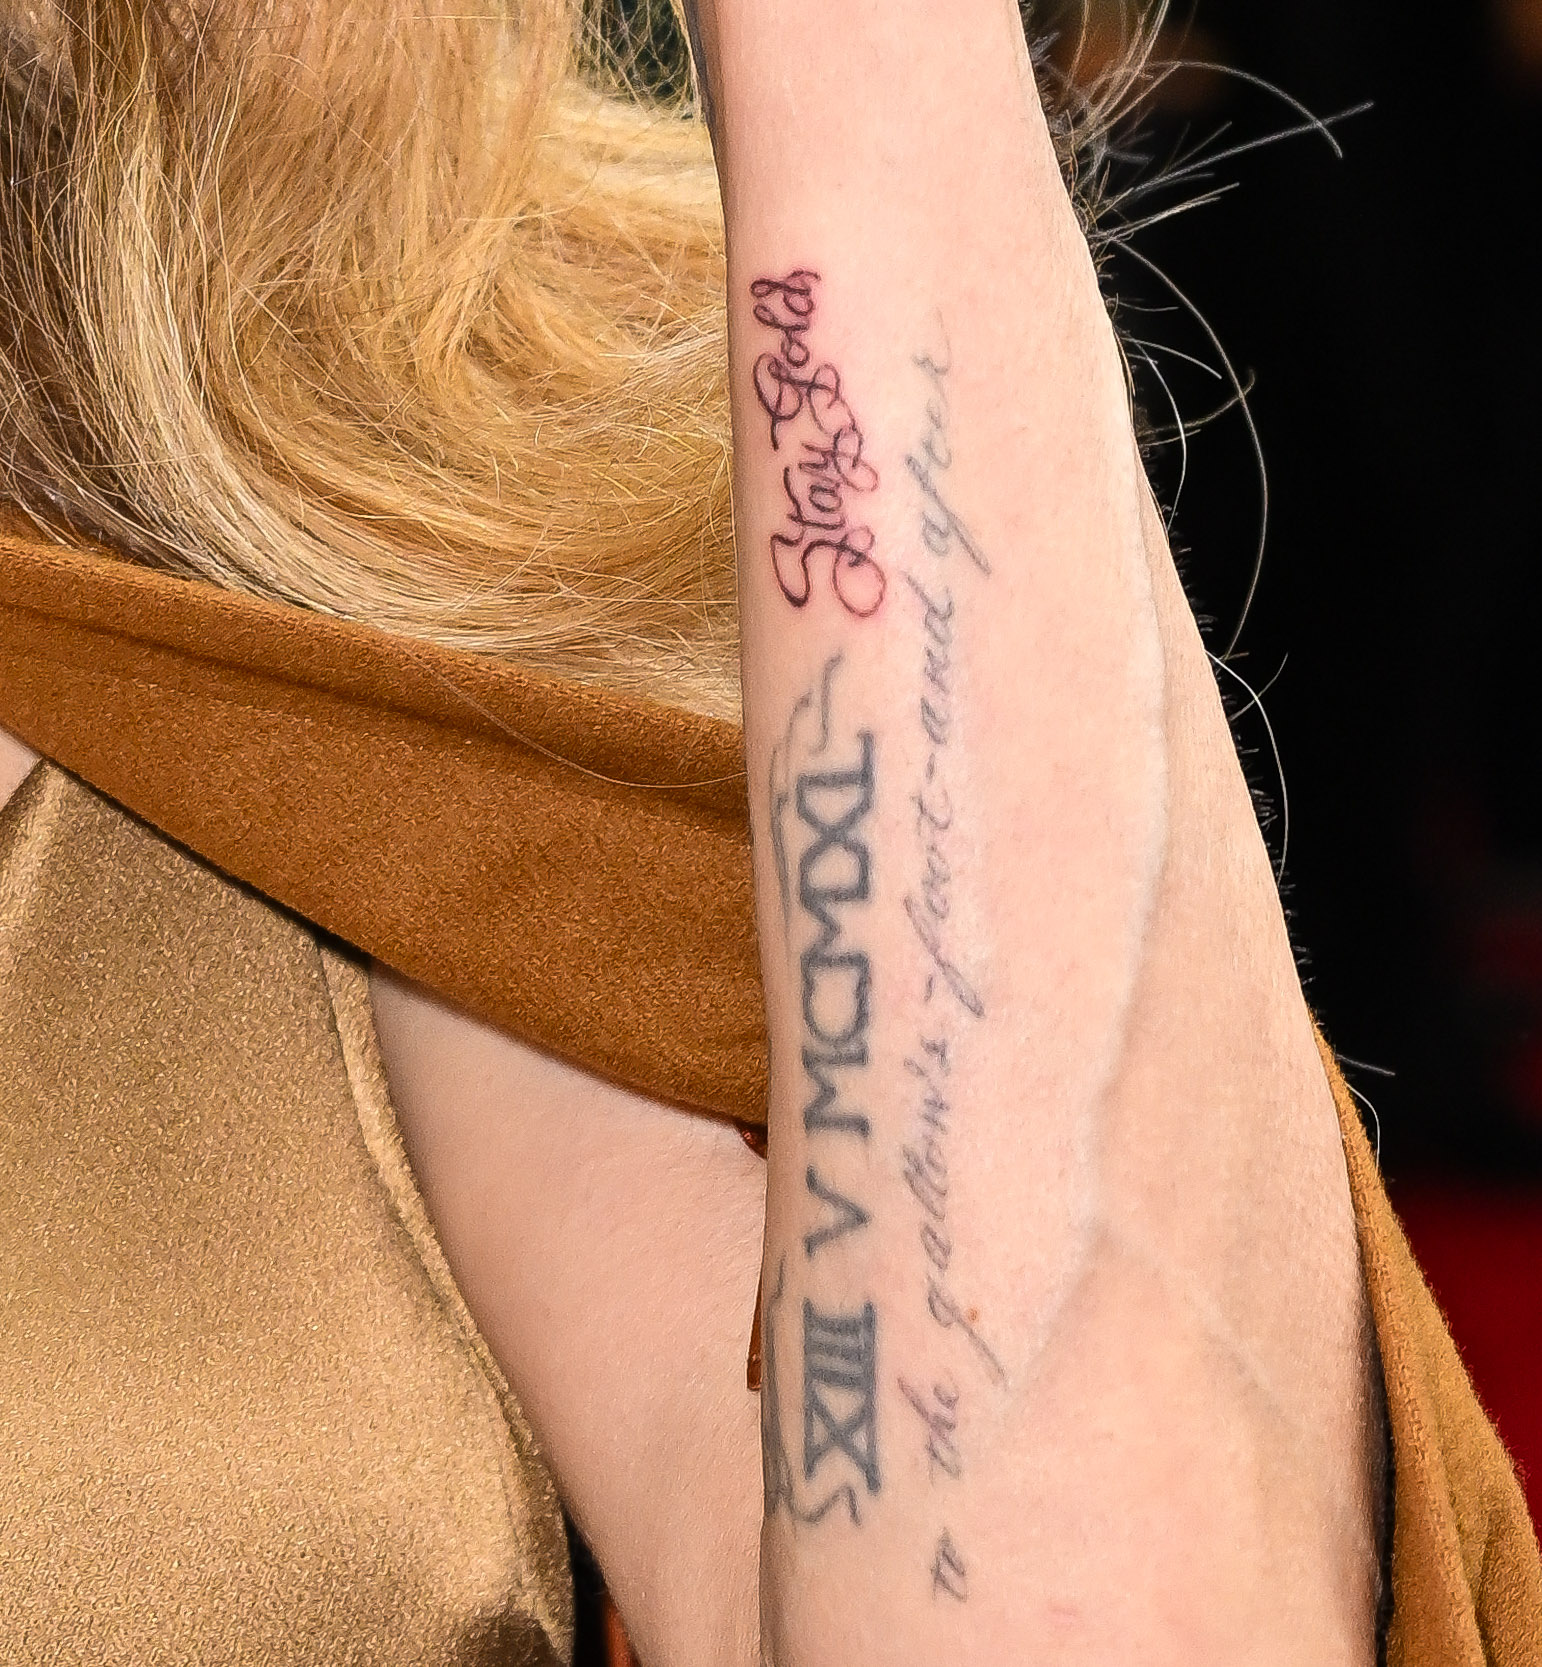 A close-up of Angelina Jolie's tattoo Angelin Jolie at the opening night of "The Outsiders" at The Bernard B. Jacobs Theatre on April 11, 2024 in New York City | Source: Getty Images